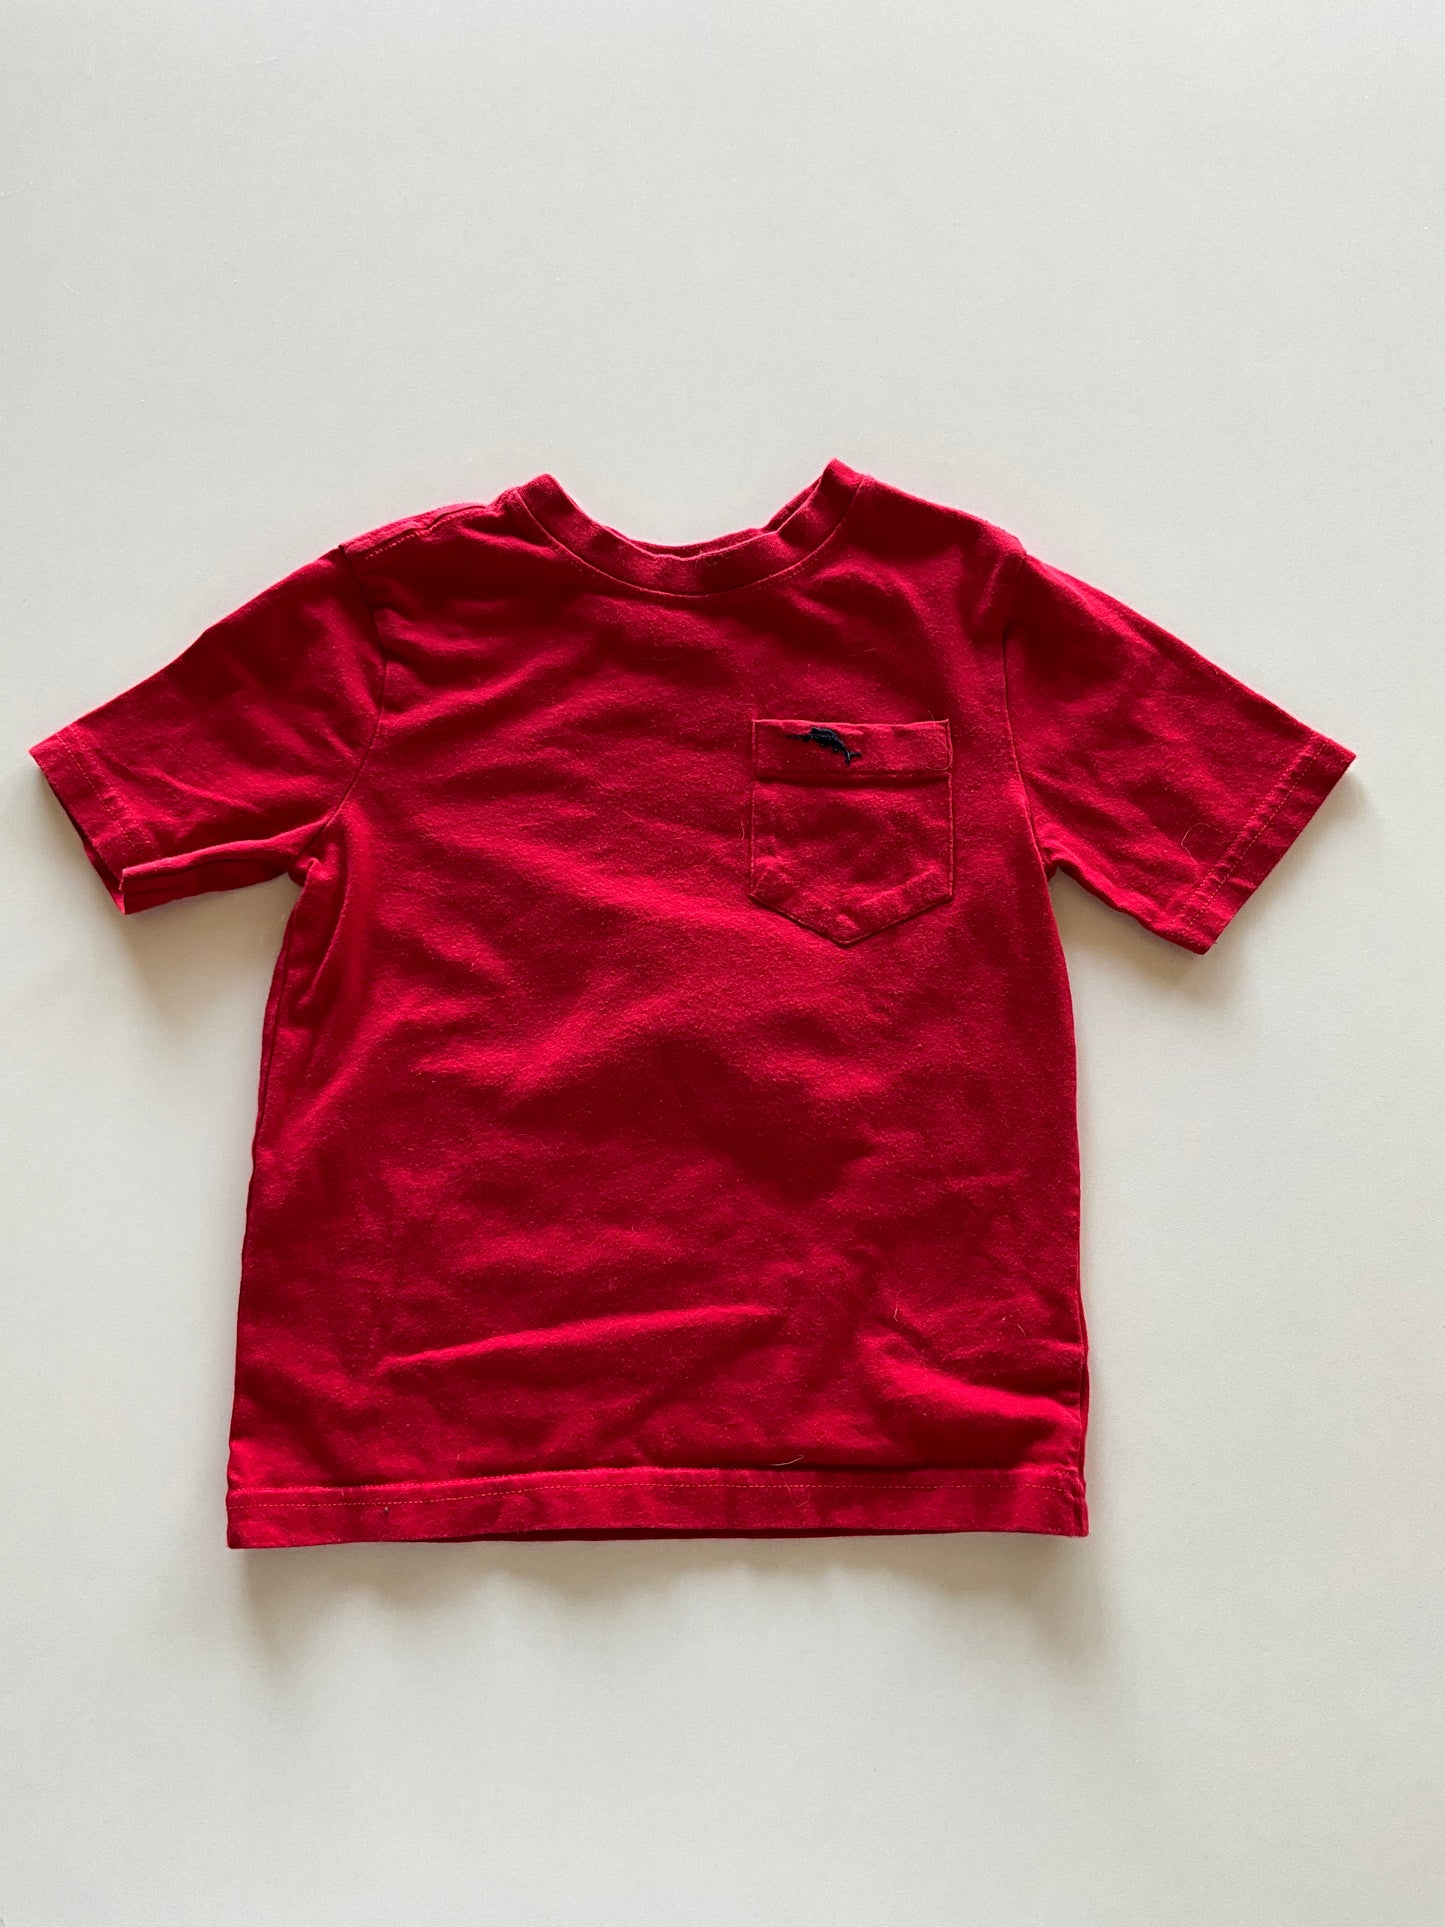 Red Pocket Tee